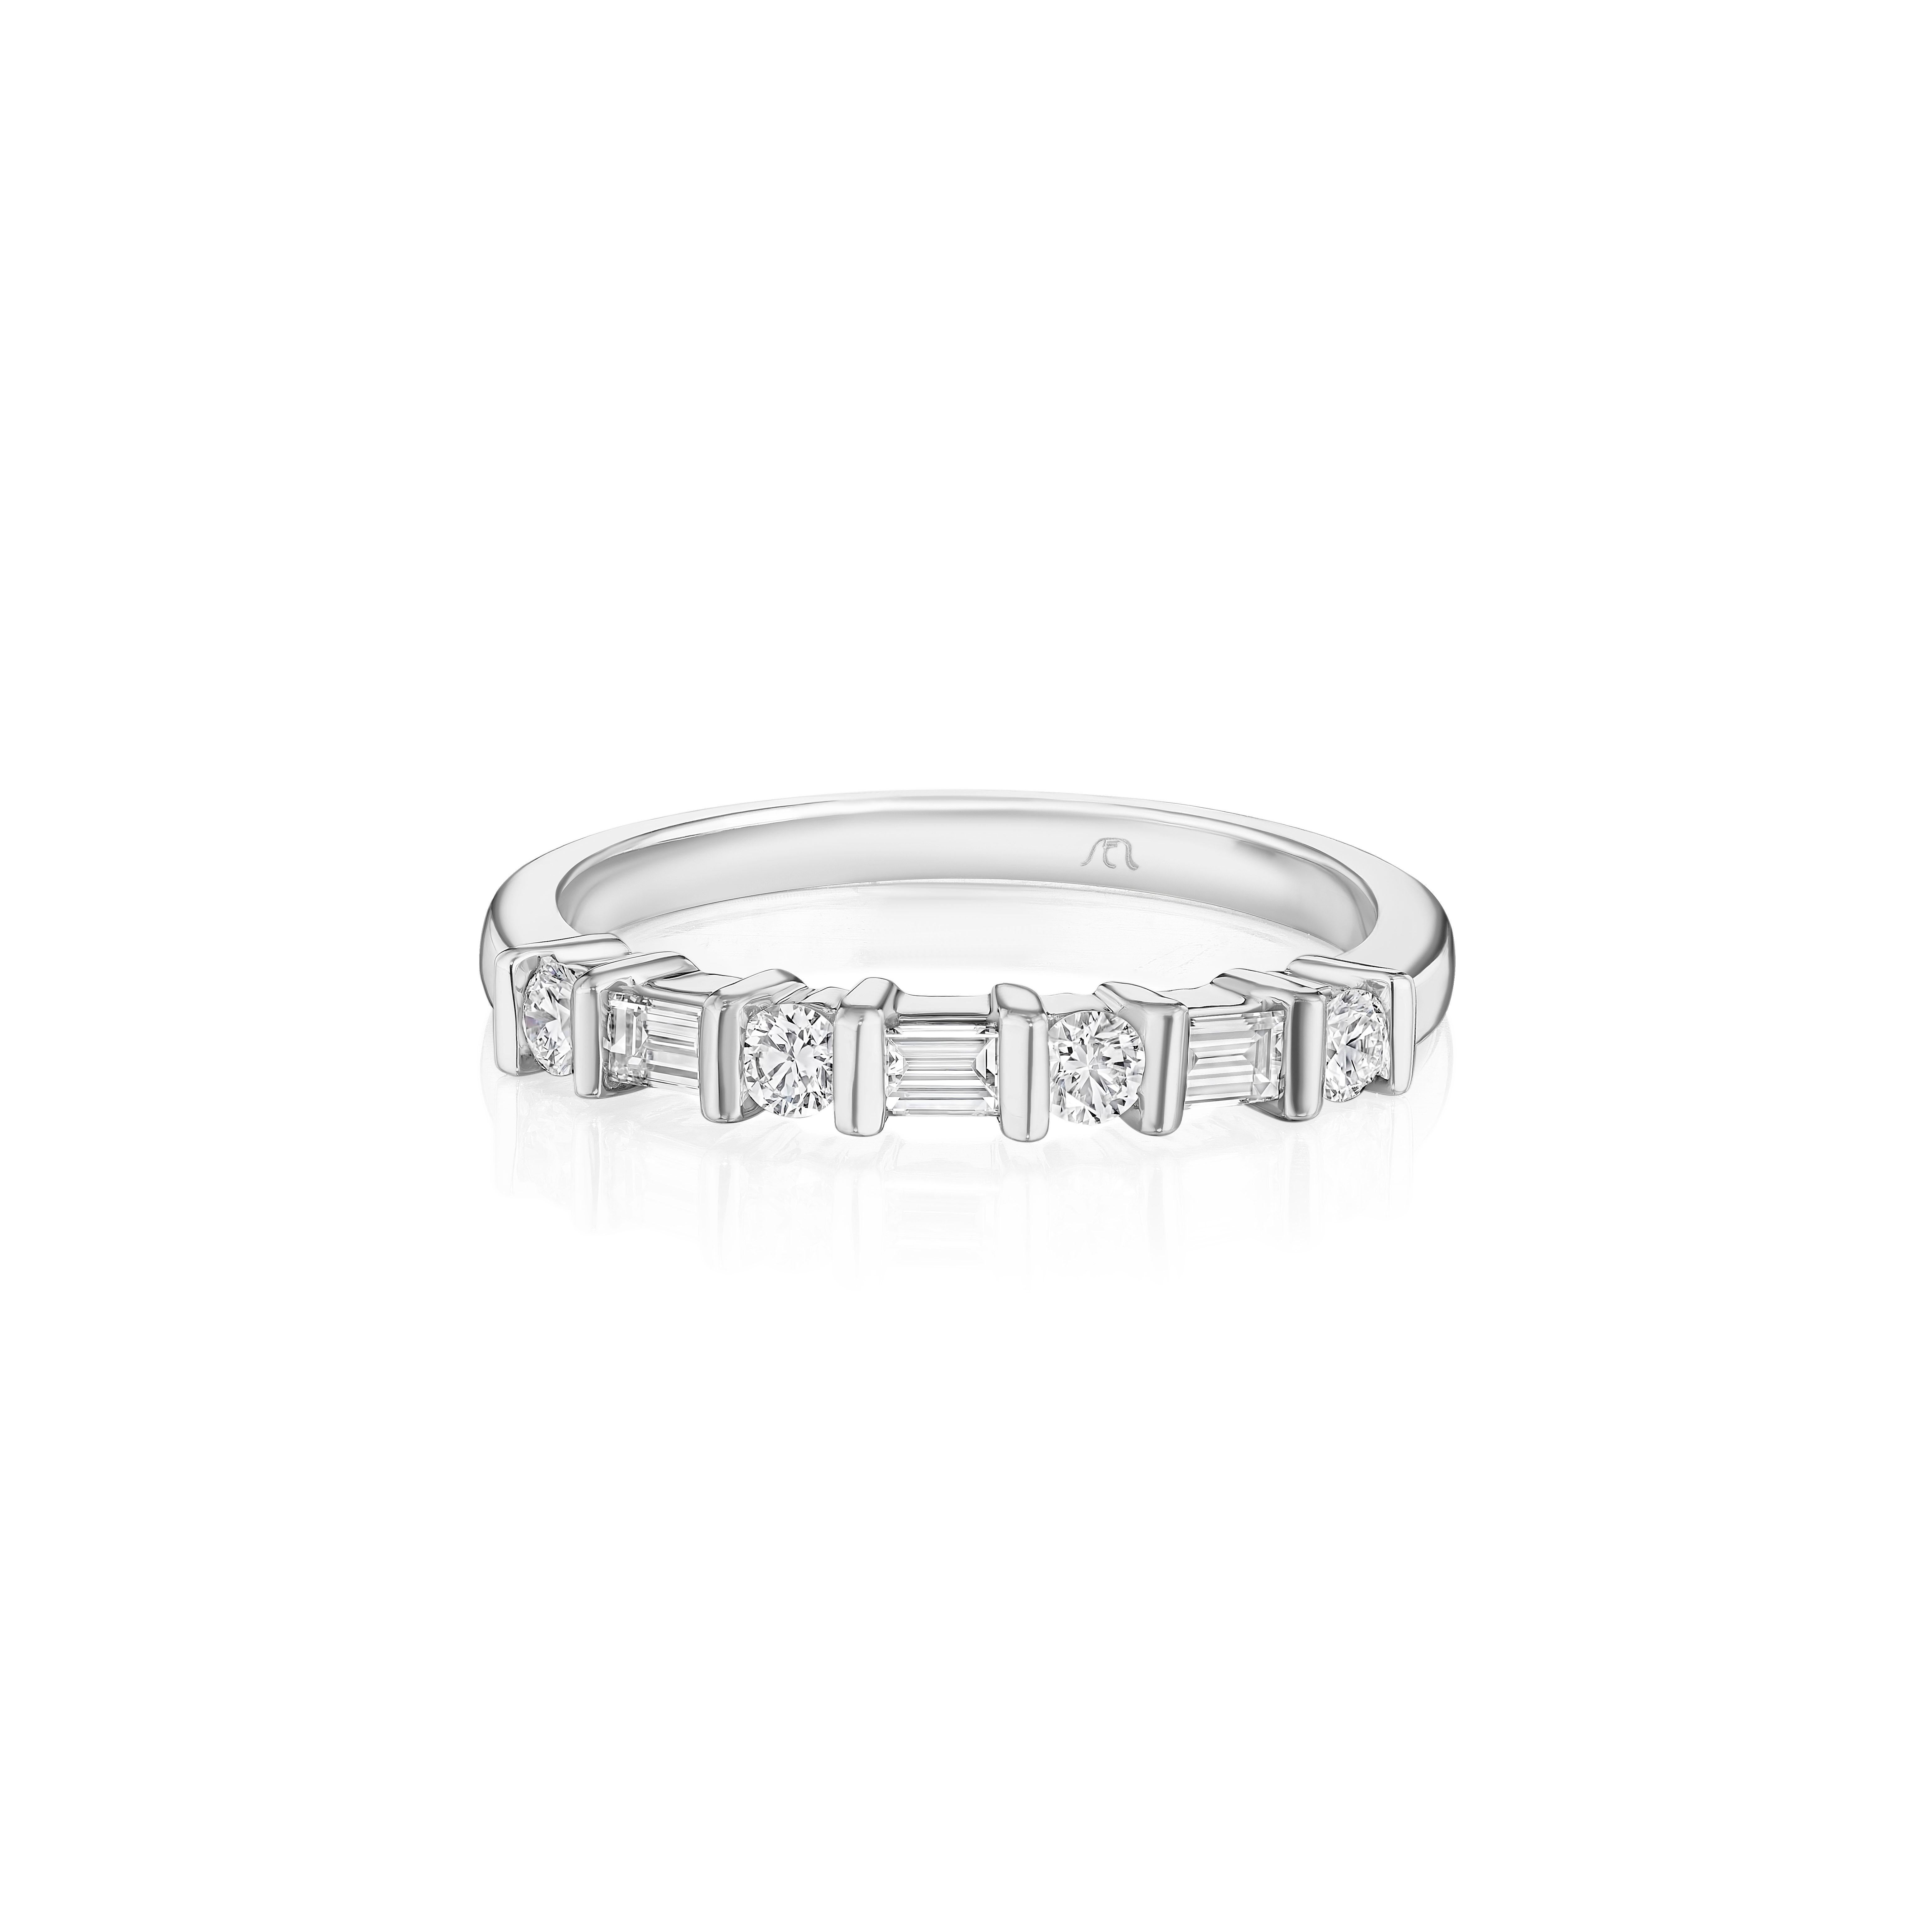 •	Crafted in 18KT Gold, this band is made with alternating round and baguette cut diamonds. The stones are secured in a bar setting and has a combining total weight of approximately 0.45 carats. 
Worn beautifully on its own or stacked. A beautiful